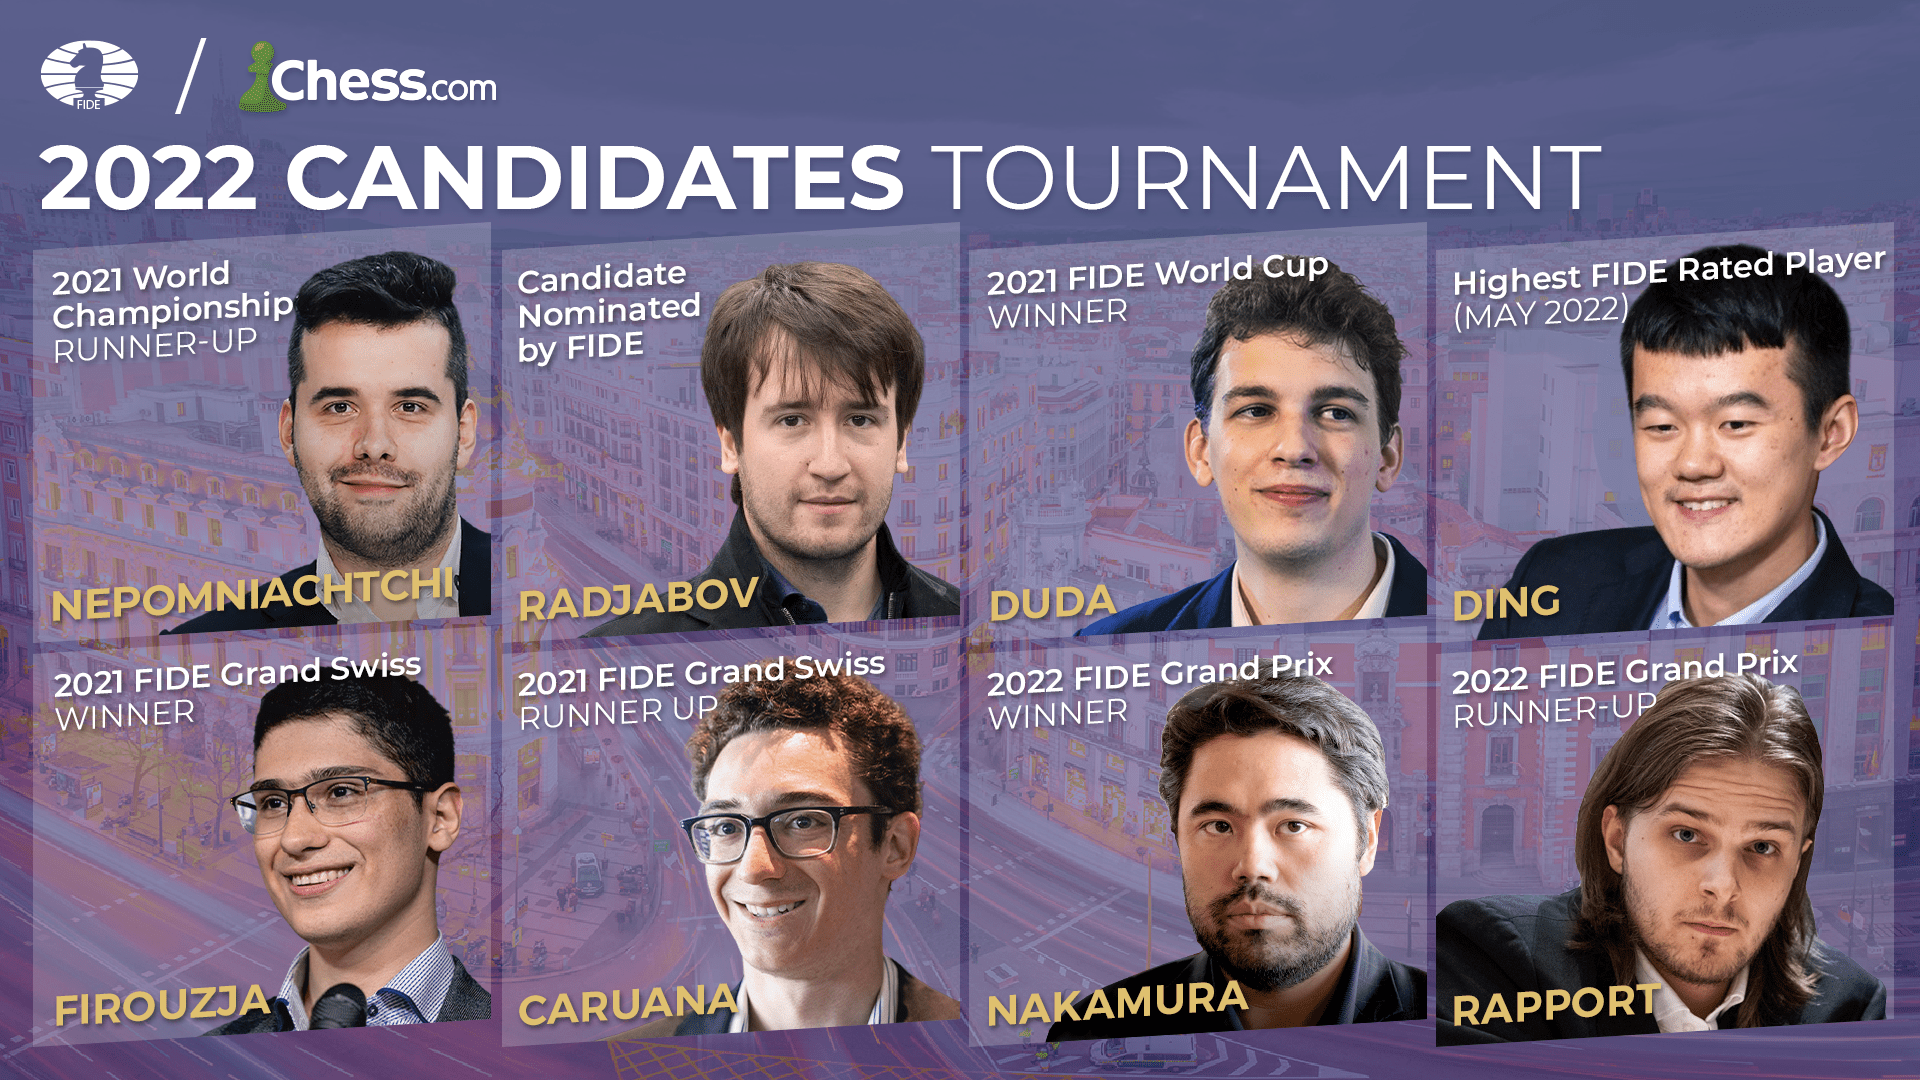 Meet The 2022 Candidates - Chess.com